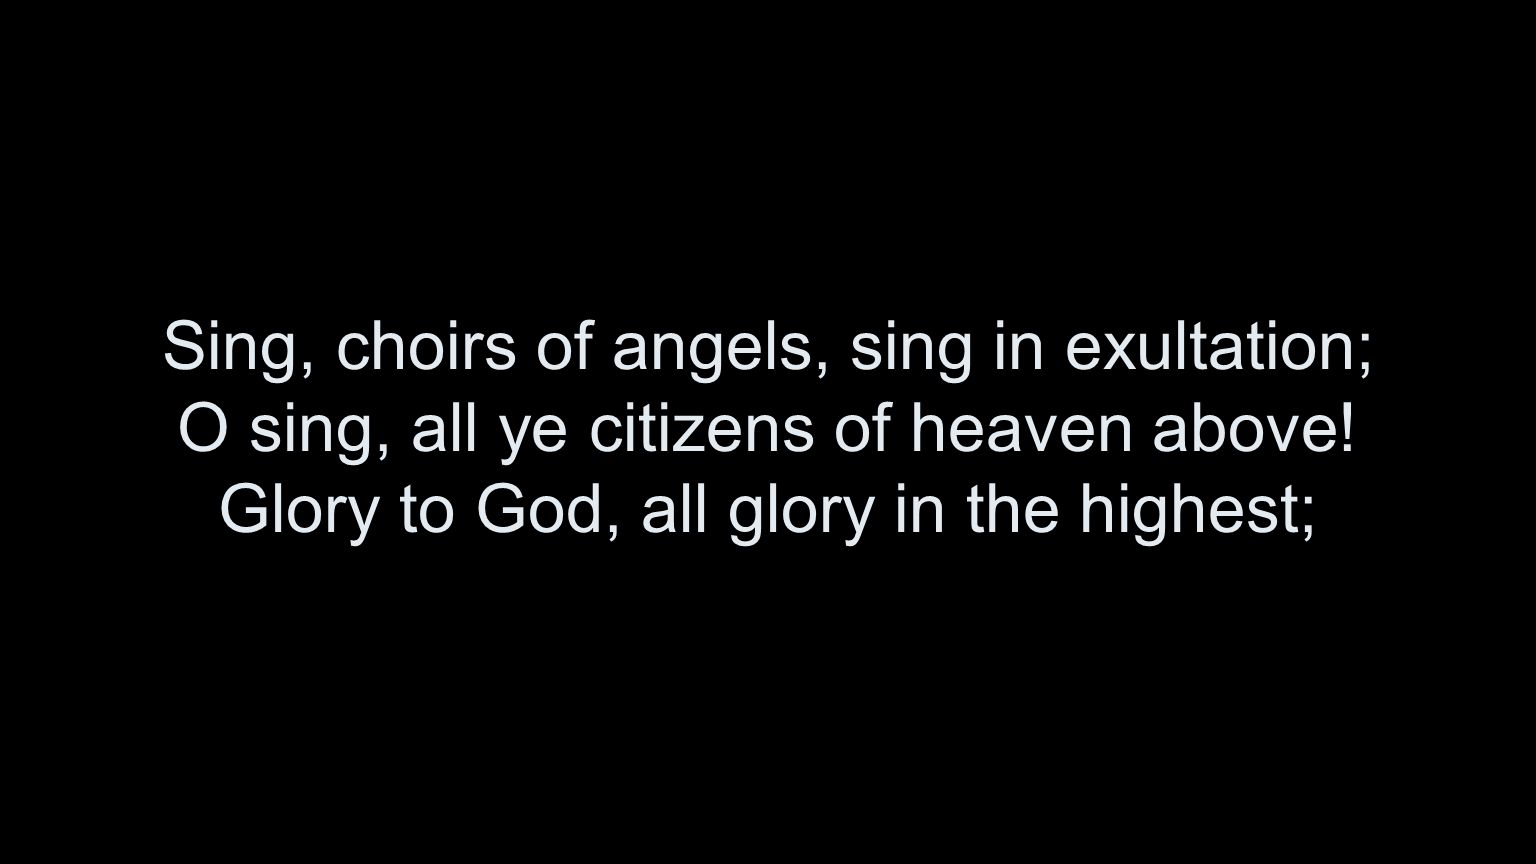 Sing, choirs of angels, sing in exultation; O sing, all ye citizens of heaven above.